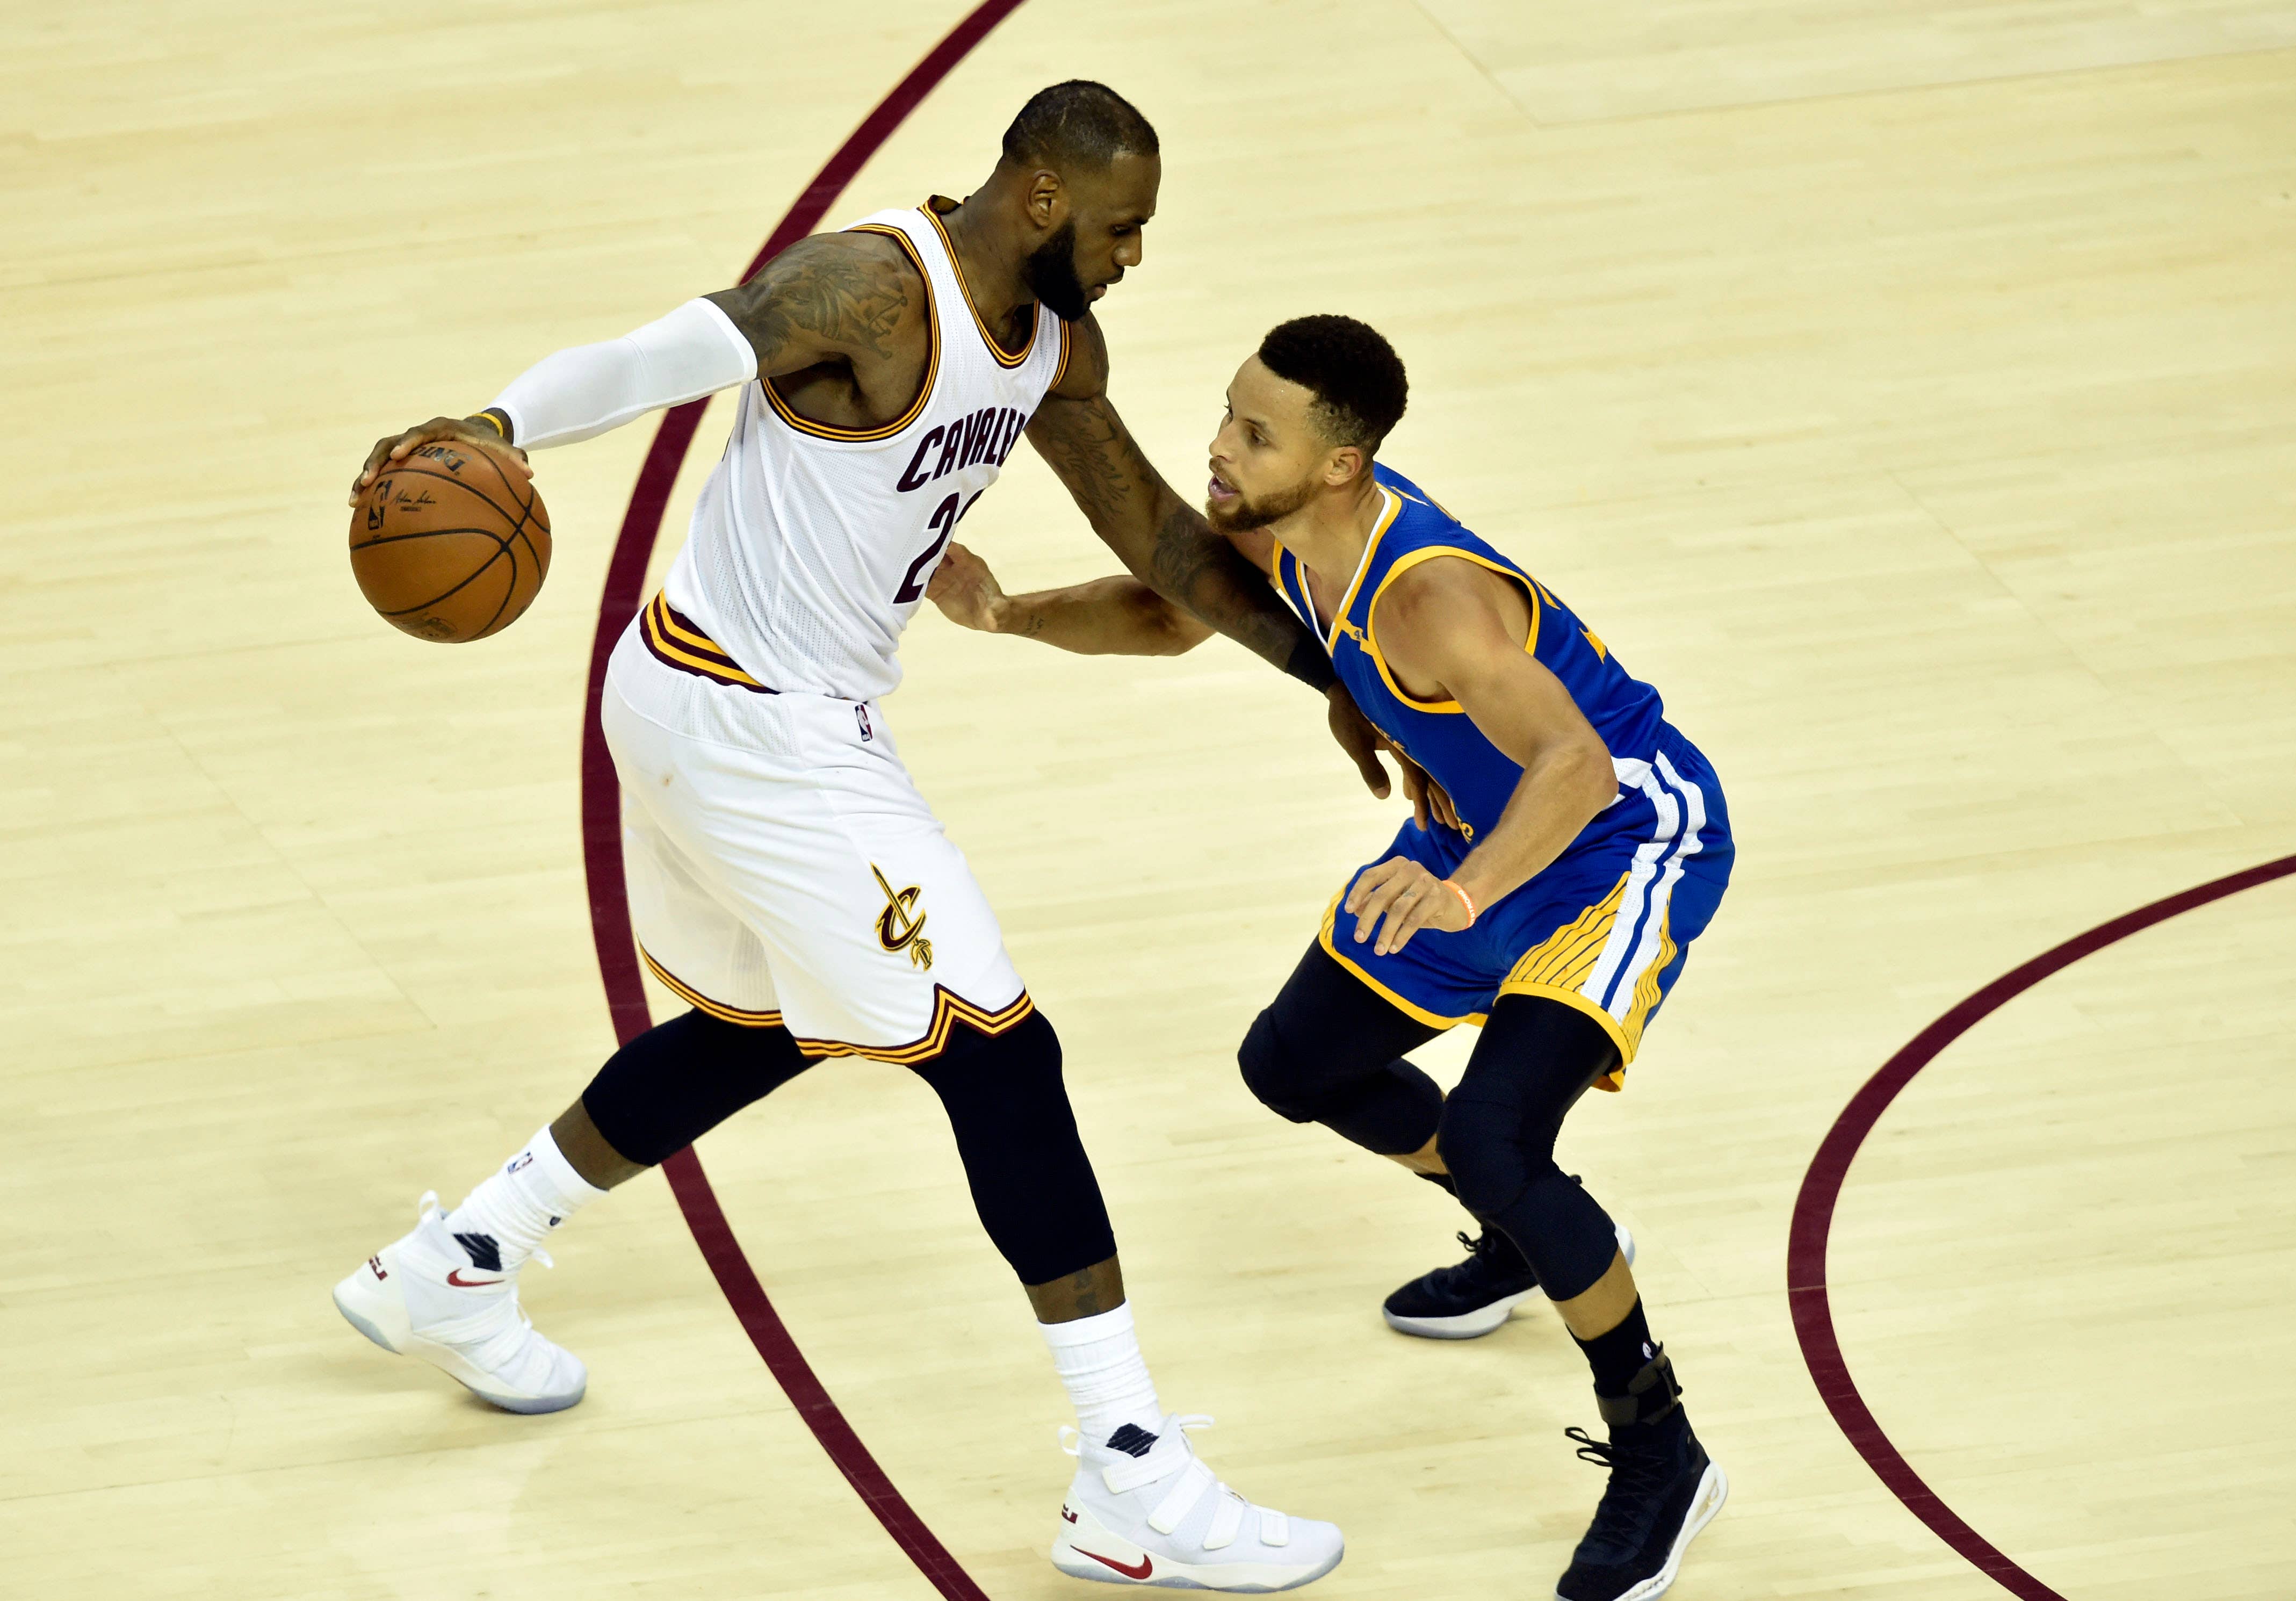 LeBron James Steph Curry Game 3 NBA Finals 2017